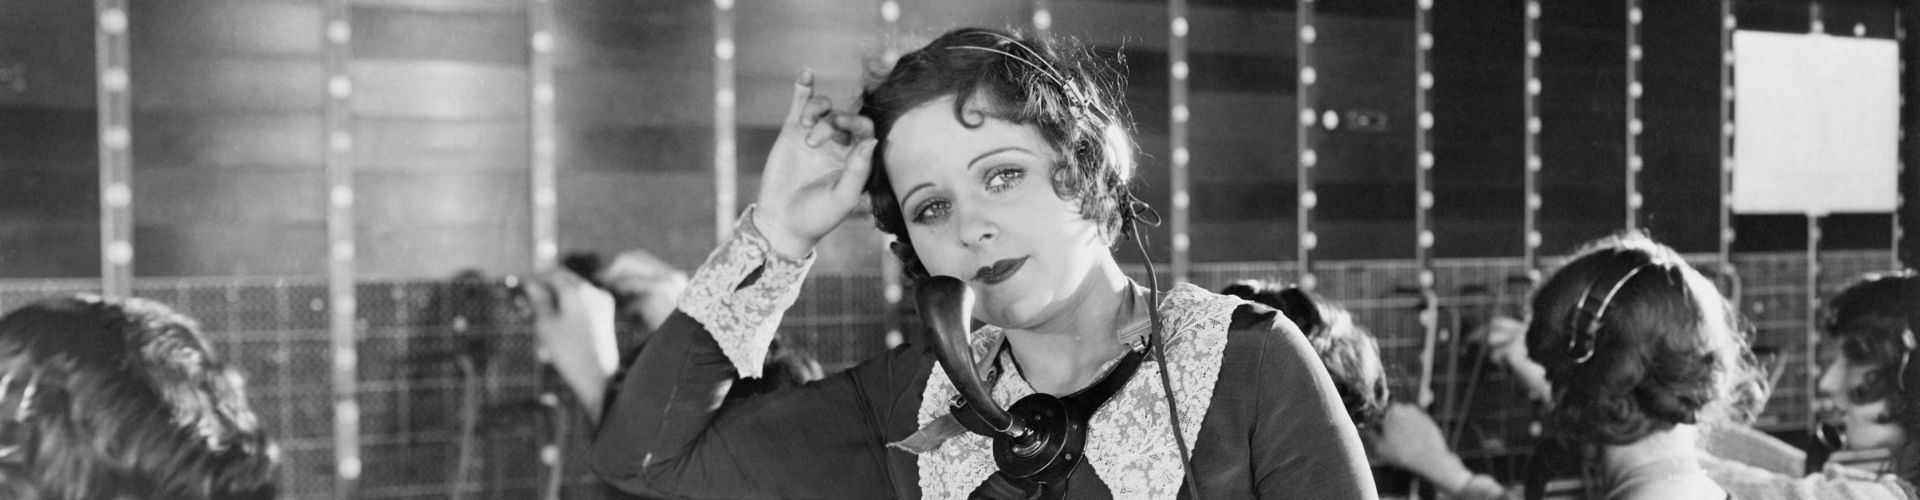 Cover photo of a telephone operator from the 1920s